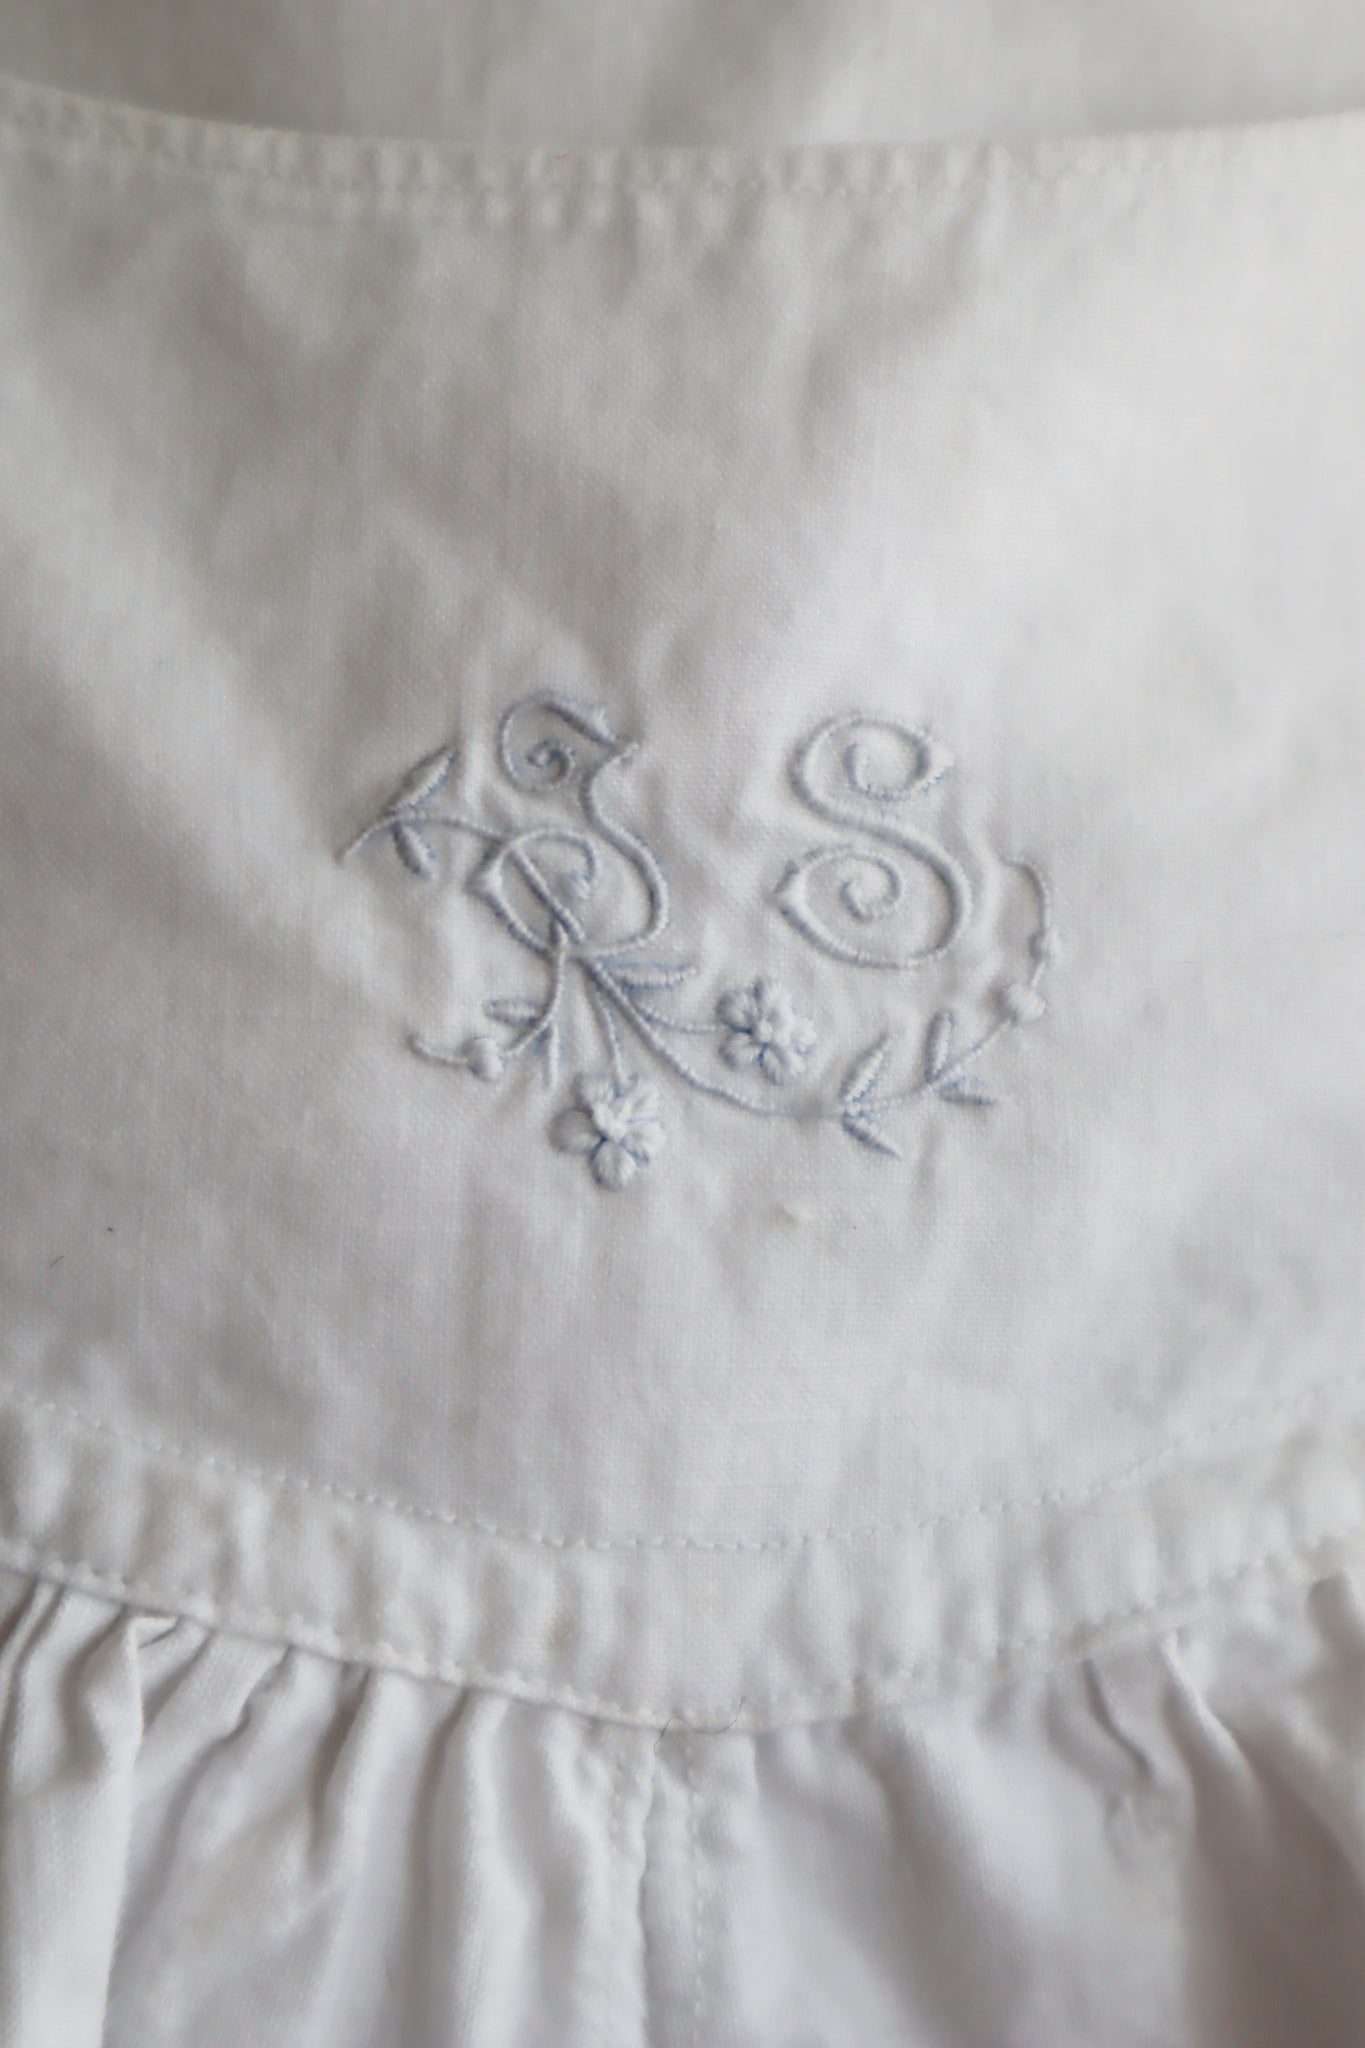 Late 1800s French White Cotton Frilled Lace Bloomers Pants